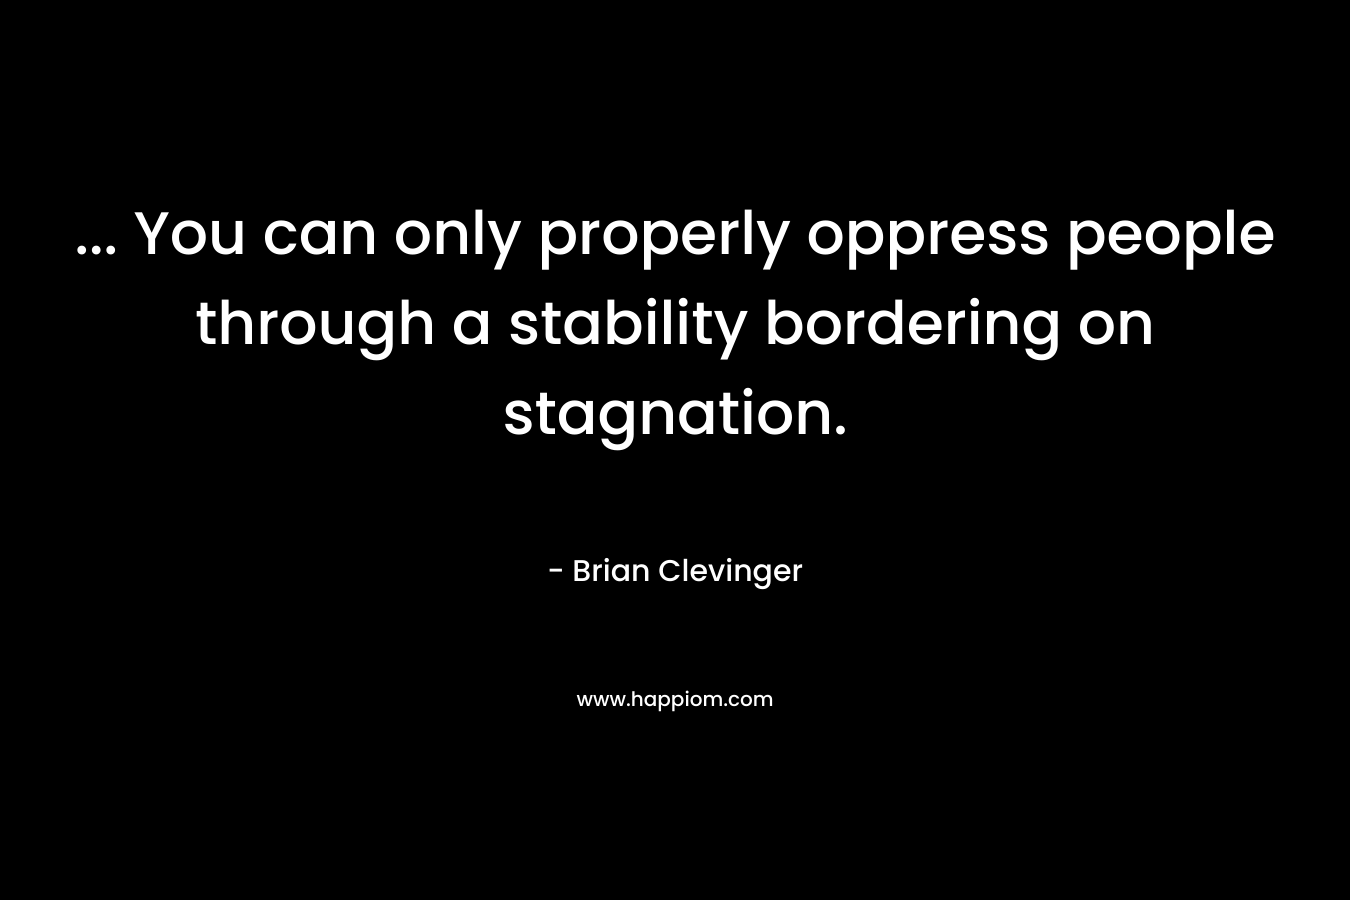 … You can only properly oppress people through a stability bordering on stagnation. – Brian Clevinger